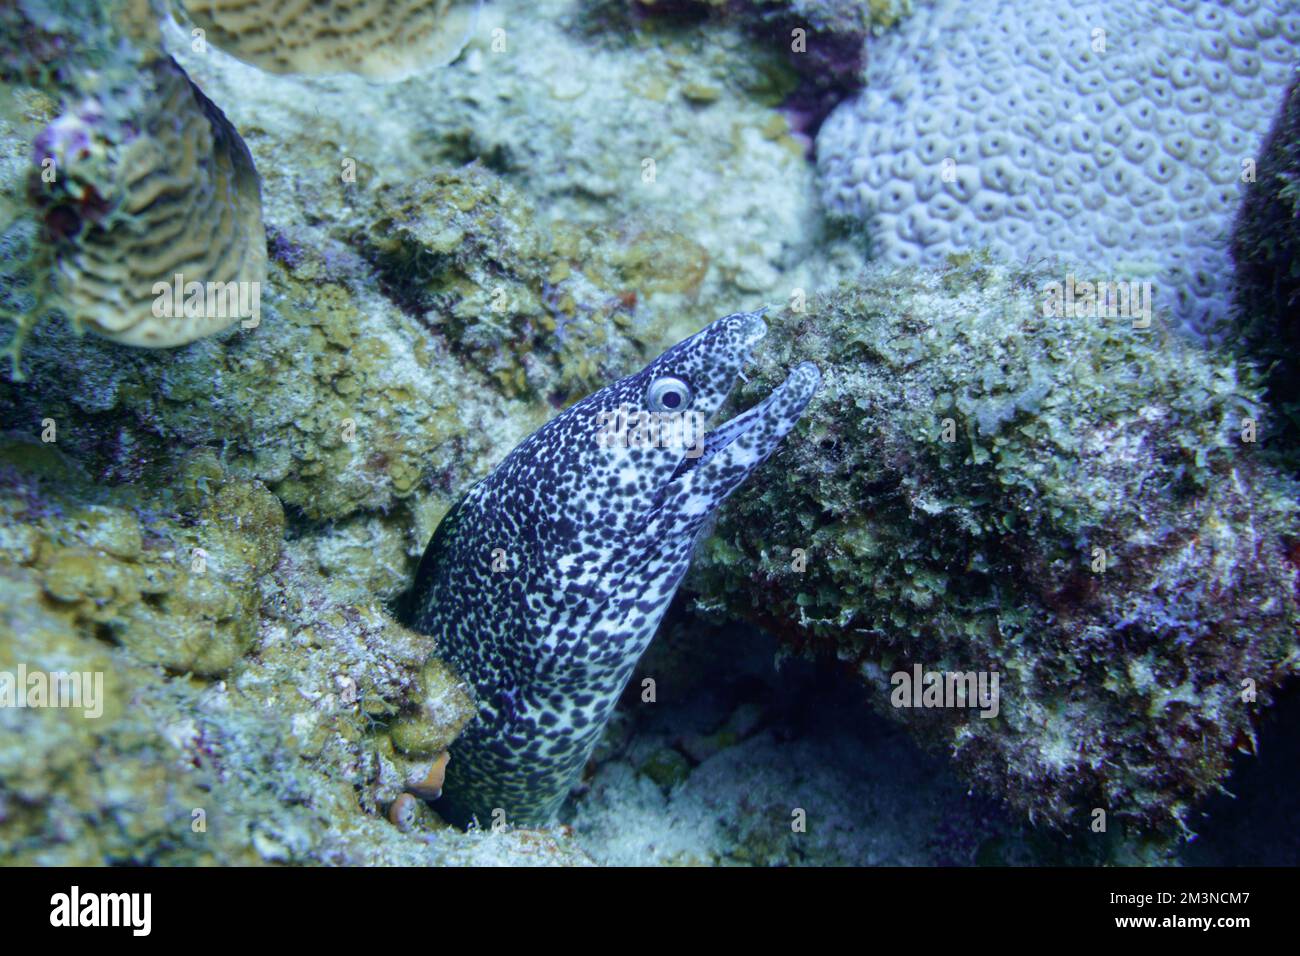 A beautiful spotted moray eel in the colourful coral reef. Scuba Diving underwater photography Stock Photo